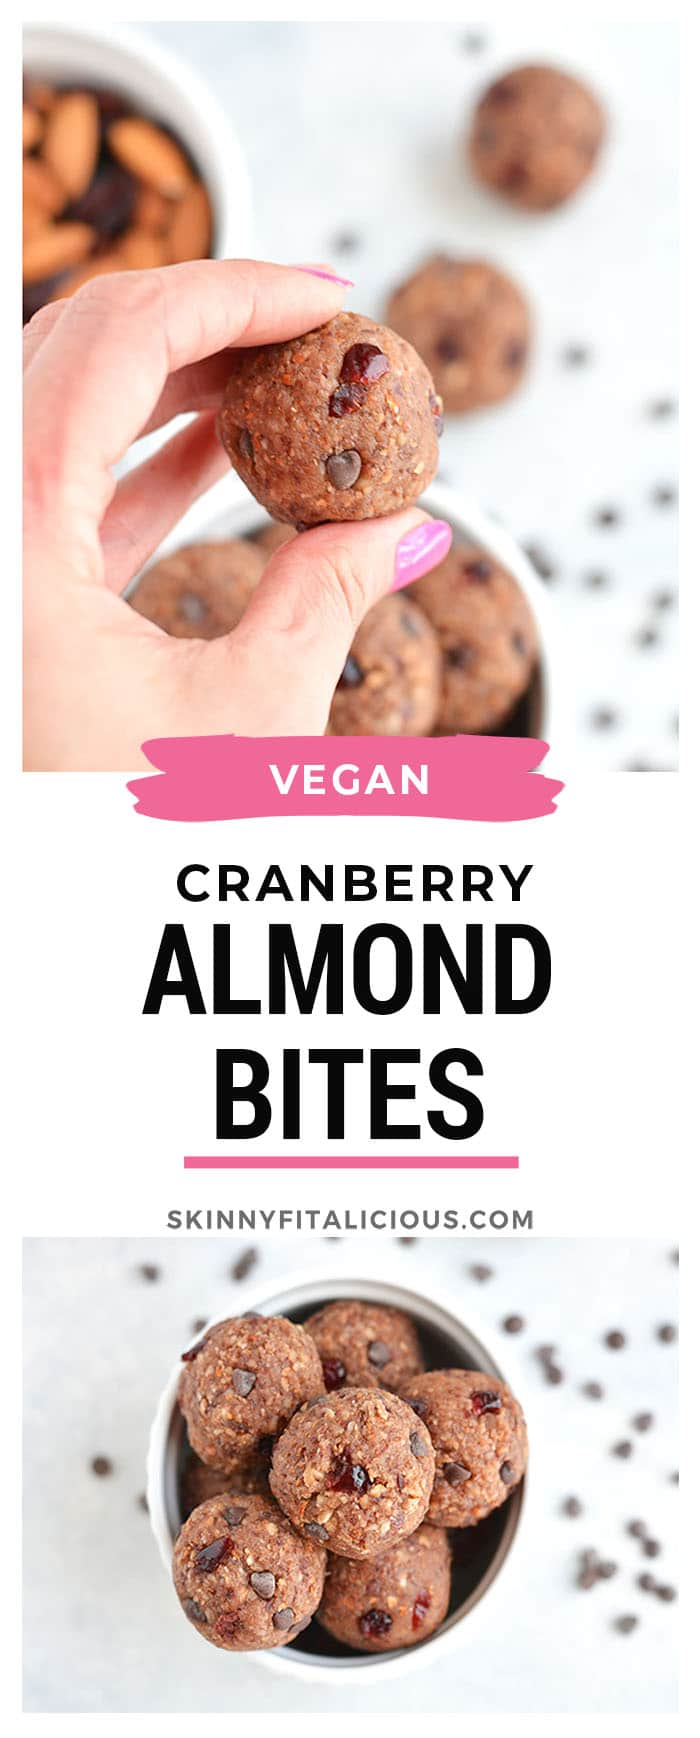 These Vegan Chocolate Almond Cranberry Bliss Bites are a must make for healthy snacking! Super simple to make with only 7 ingredients. No baking required! Gluten Free + Paleo + Vegan + Low Calorie